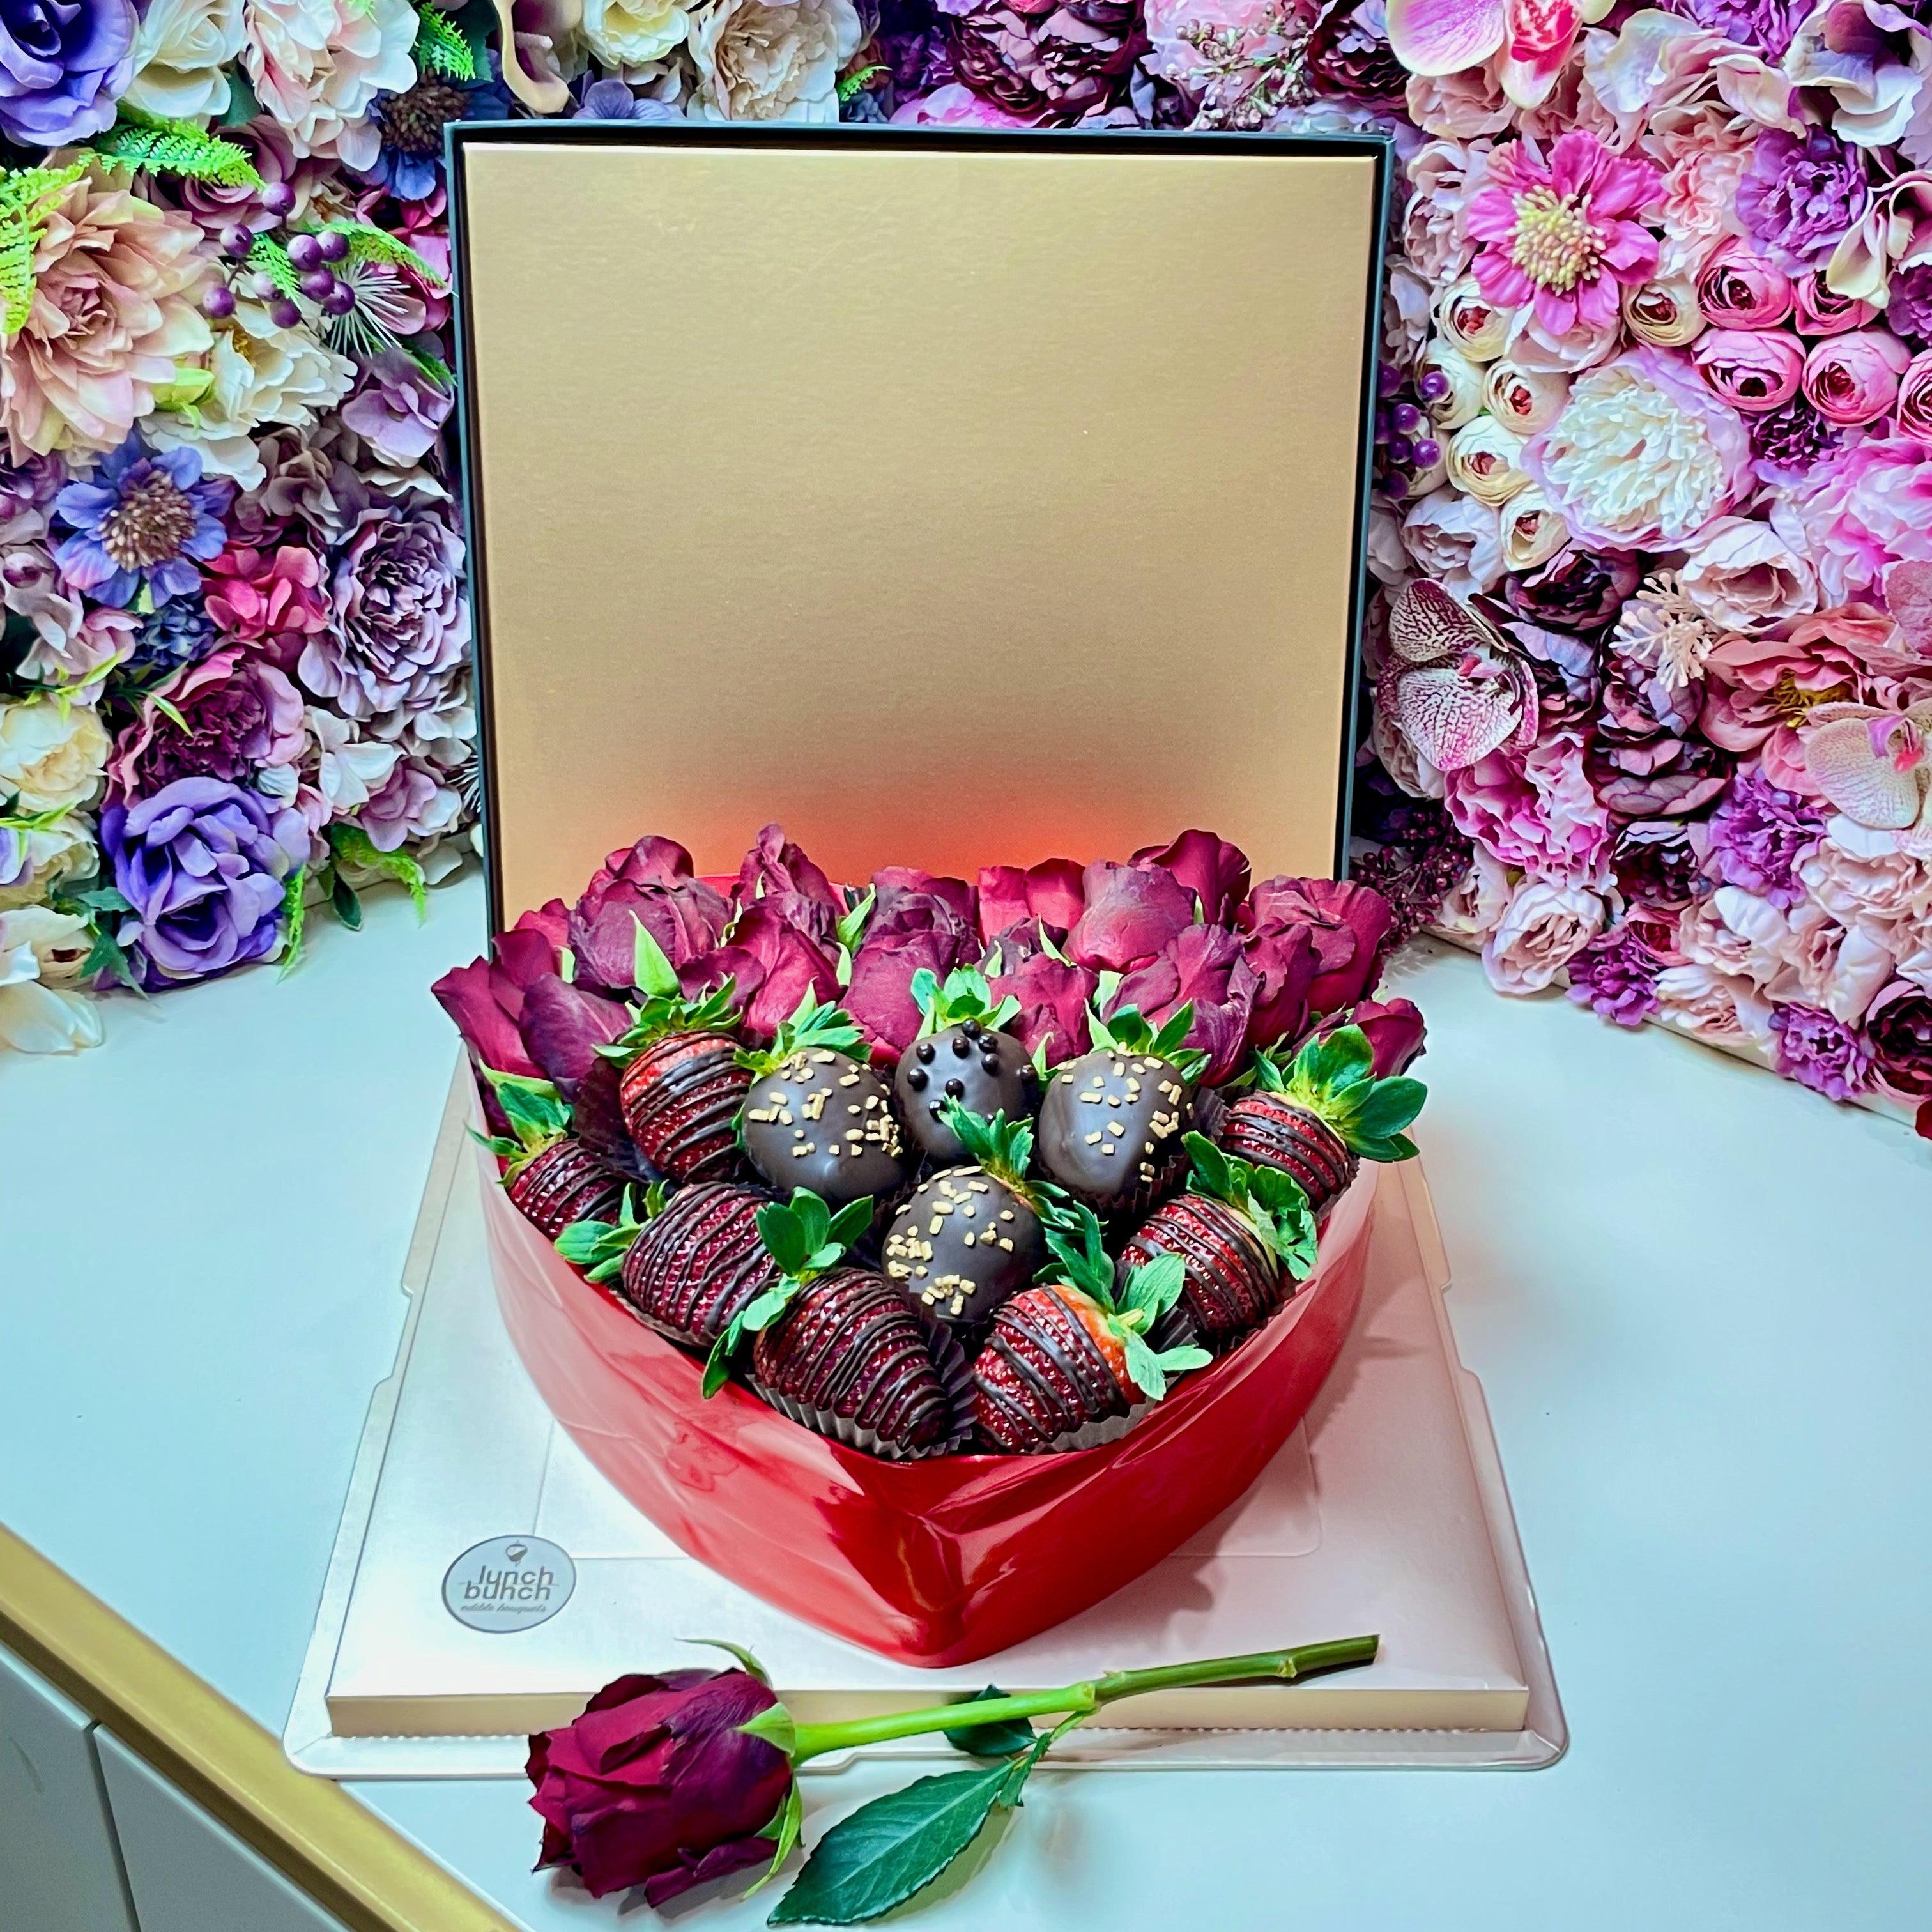 Romantic Gift for her, chocolate and roses hamper delivery, chocolate covered strawberries gift box, 